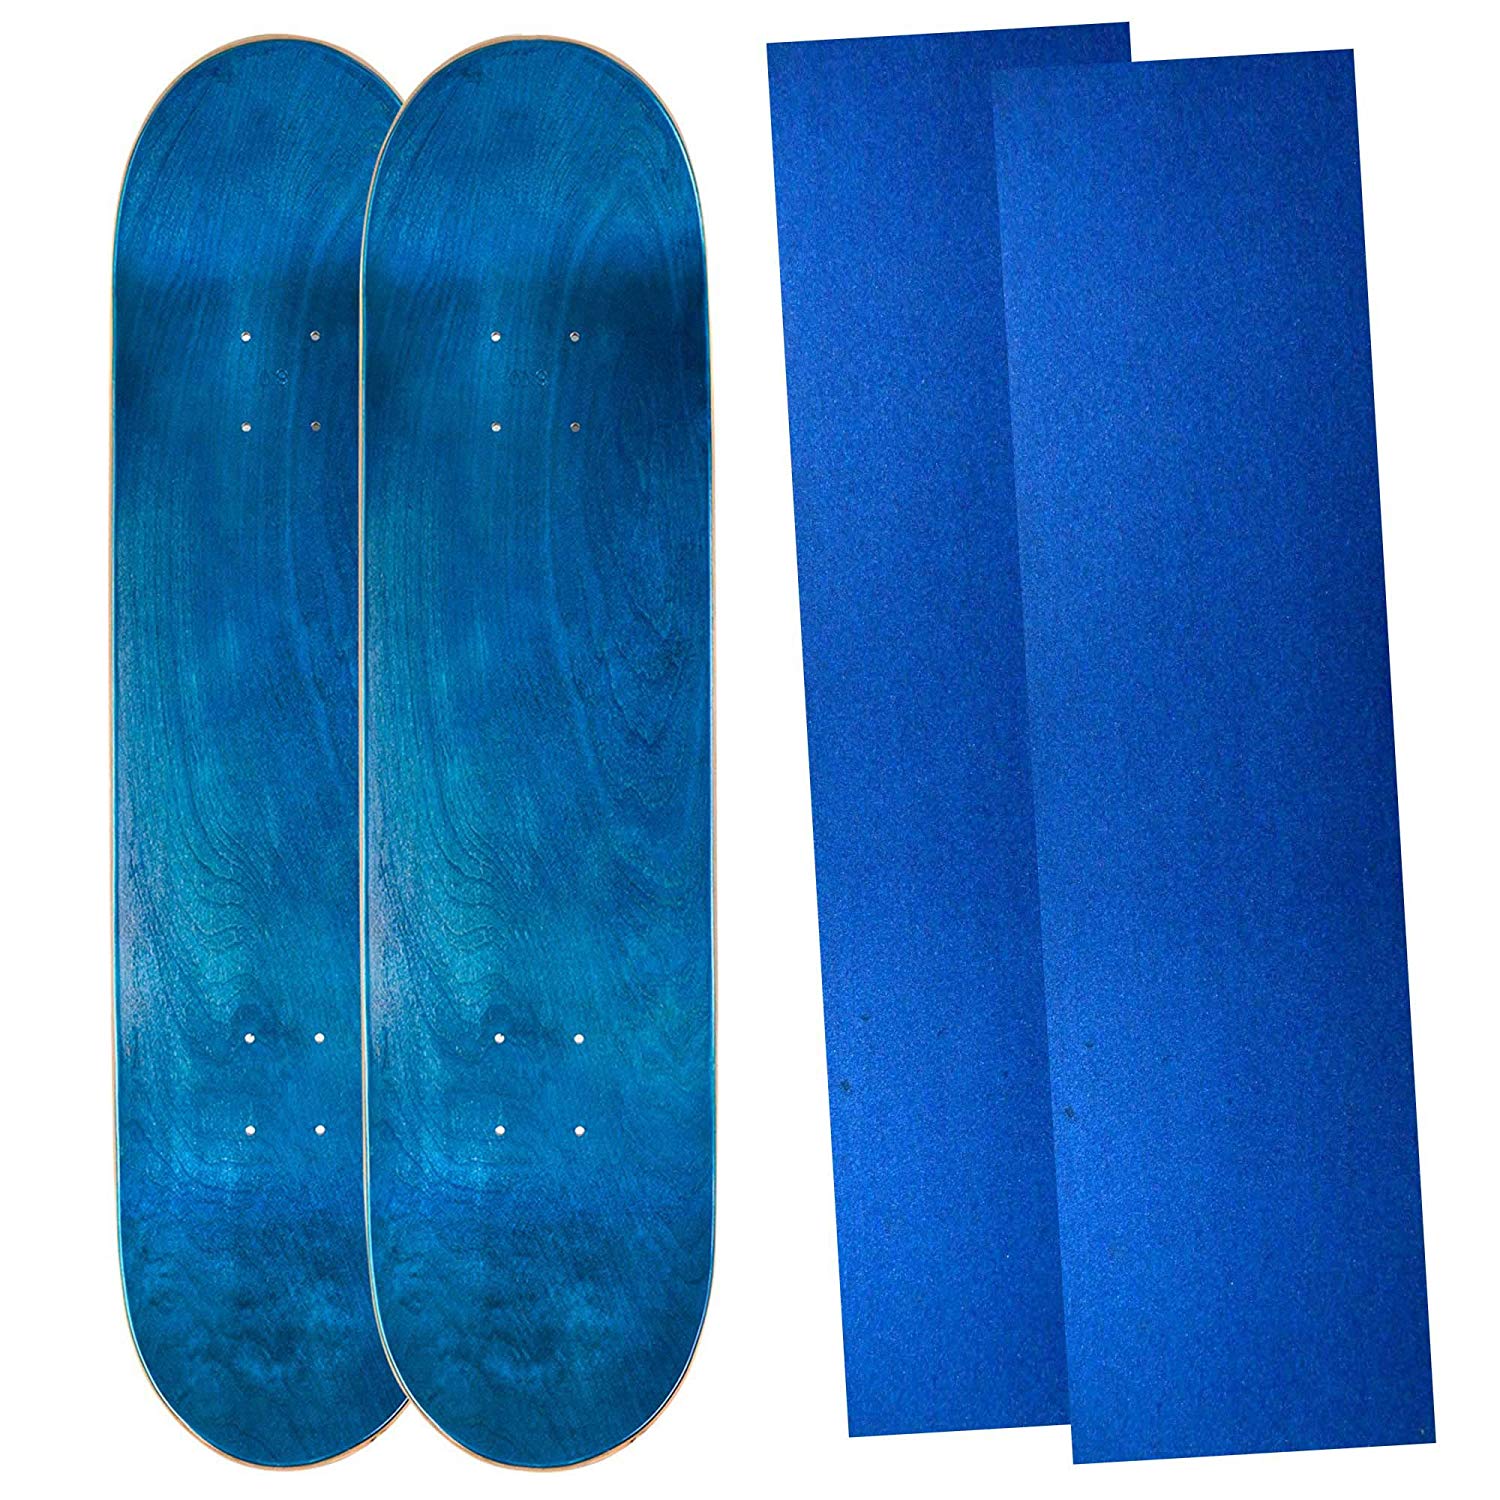 Cal 7 Blank Maple Skateboard Deck with Color Grip Tape | 8.5 Inch | Two Pack (Blue) - image 1 of 3